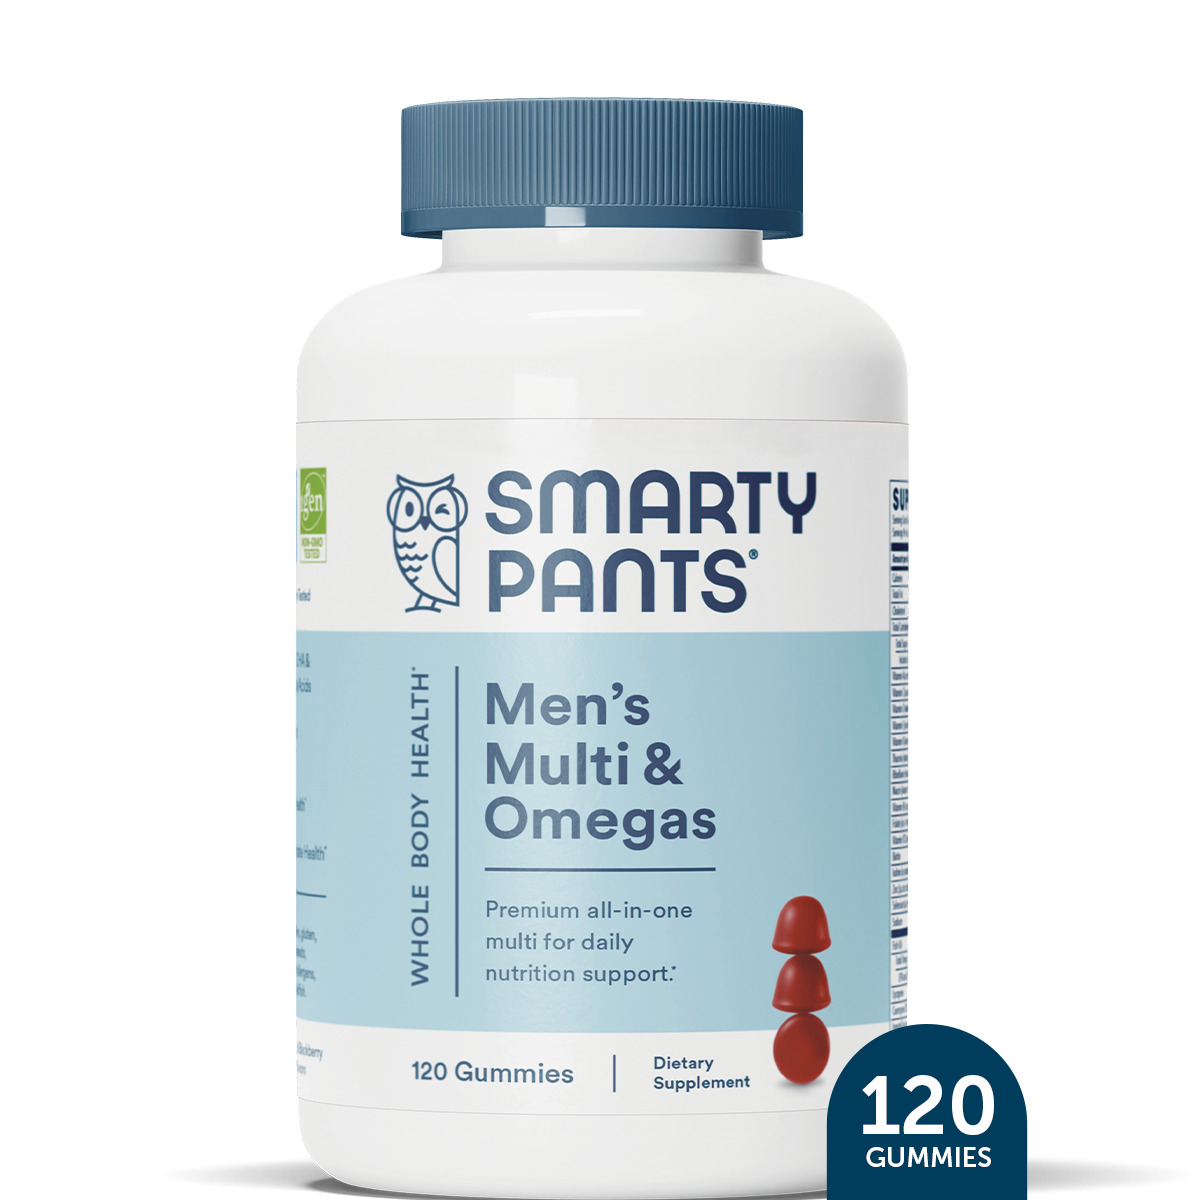 SmartyPants Men's Multi & Omega 3 Fish Oil Gummy Vitamins with D3, C & B12 - 120 ct - image 1 of 12